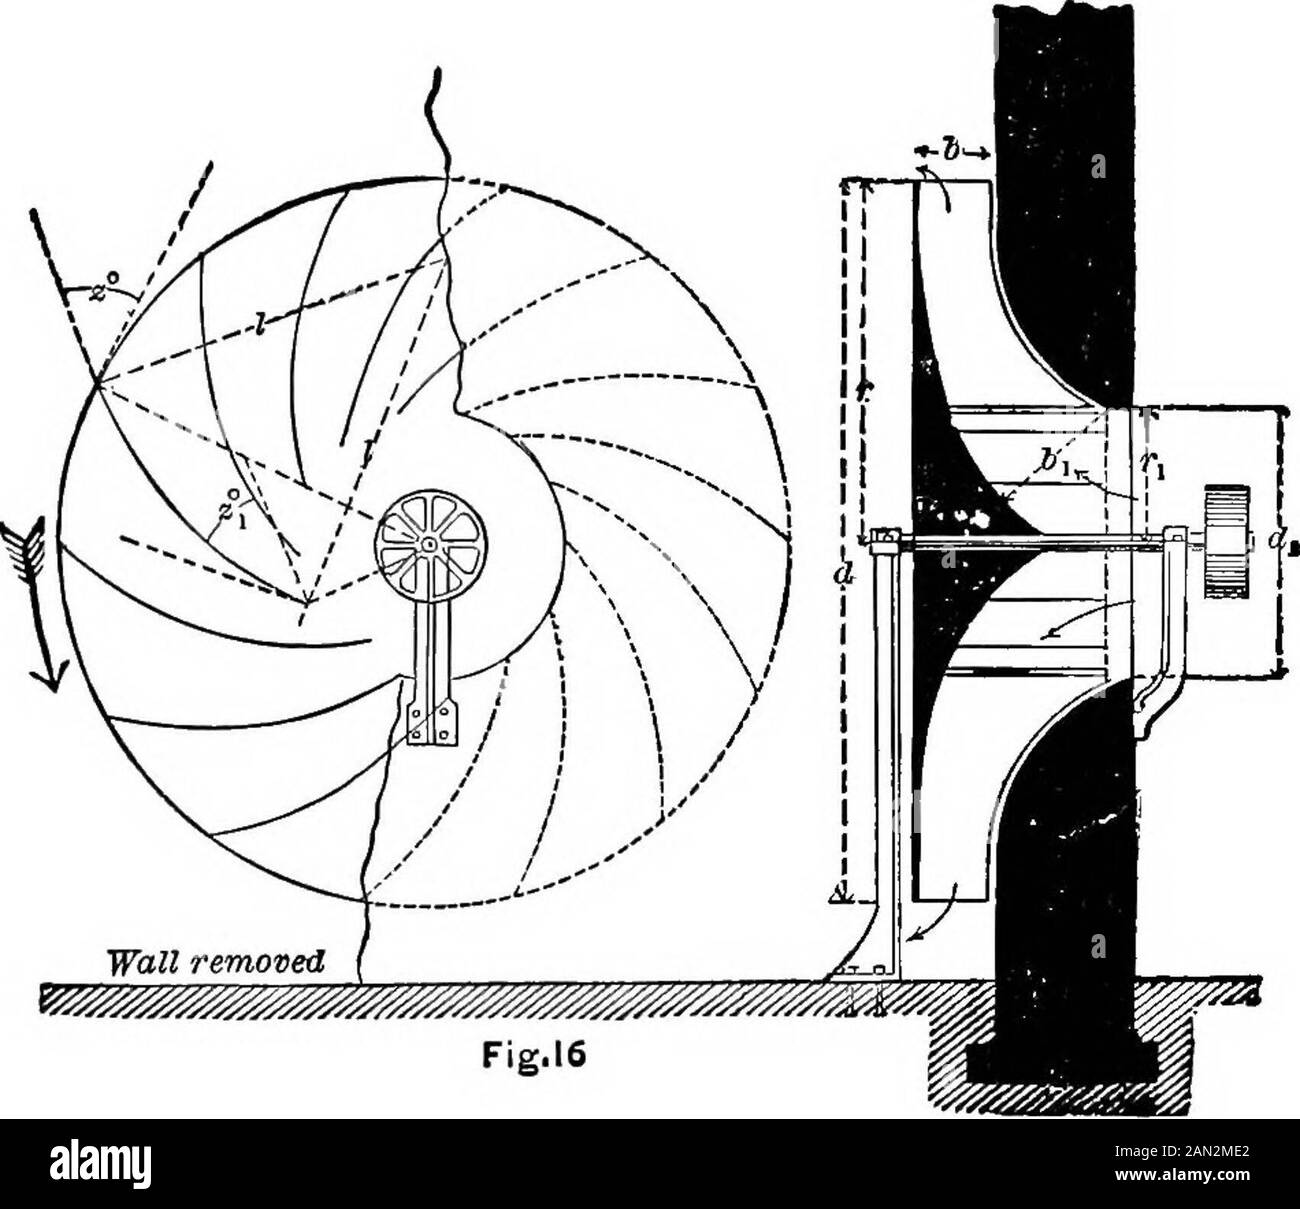 A manual of heating and ventilation, in their practical application, for the use of engineers and architectsEmbracing a series of tables and formulas for dimensions of heating flow and return pipes, for steam and hot water boilers, flues, etc., etc . ht of outlet,a, = Distance from vertical radius to point e,. VENTILATION. 27 n := Number of revolutions per minute.z° = Angle between radius and initial line of vane.Hp = Horse power required. When there is only one inlet, When there are two inlets, Ta ^ -A &gt; ?» ^^ v » V c;r * 2c;r J. 3 r ° 2/Tr,C r, = r, to 2r,; ^^V-^ r—r . nr 1 = T-^—, in whi Stock Photo